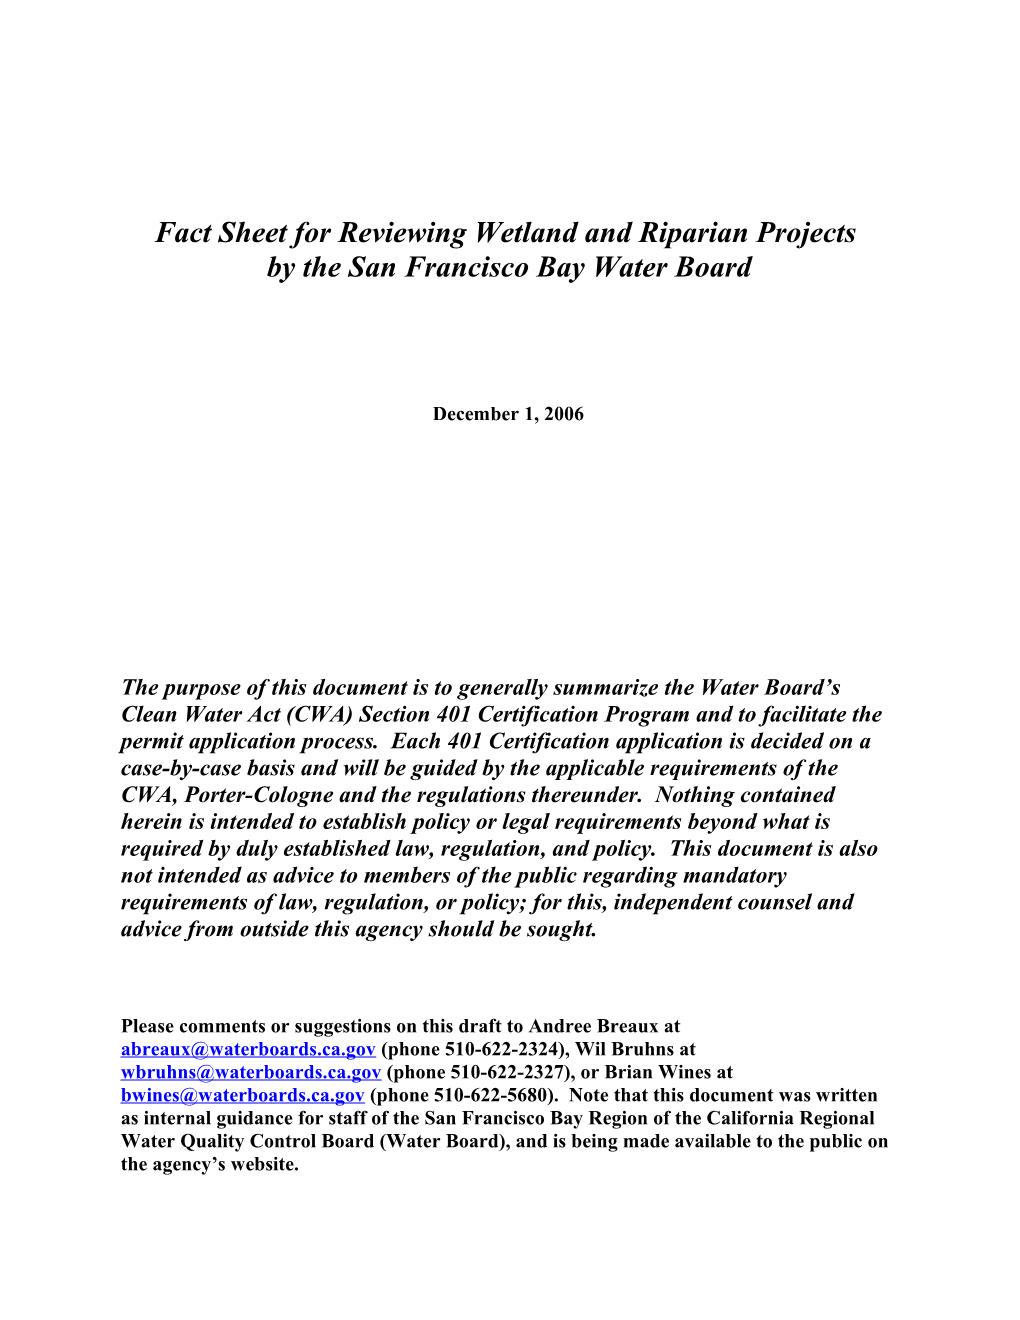 Fact Sheet Forreviewing Wetland and Riparian Projects